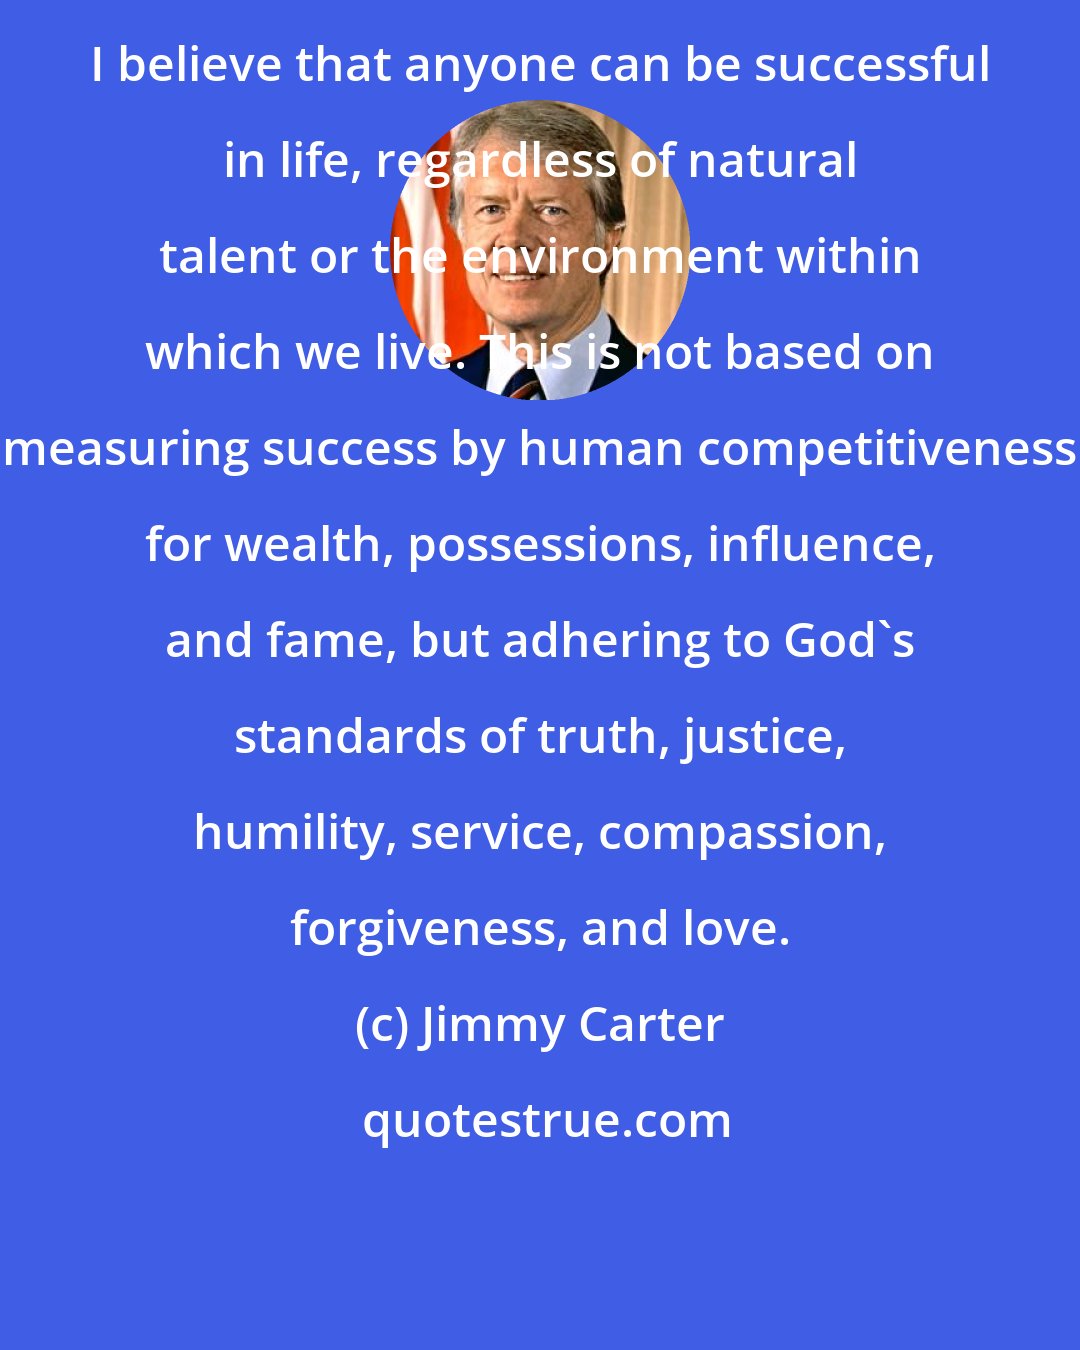 Jimmy Carter: I believe that anyone can be successful in life, regardless of natural talent or the environment within which we live. This is not based on measuring success by human competitiveness for wealth, possessions, influence, and fame, but adhering to God's standards of truth, justice, humility, service, compassion, forgiveness, and love.